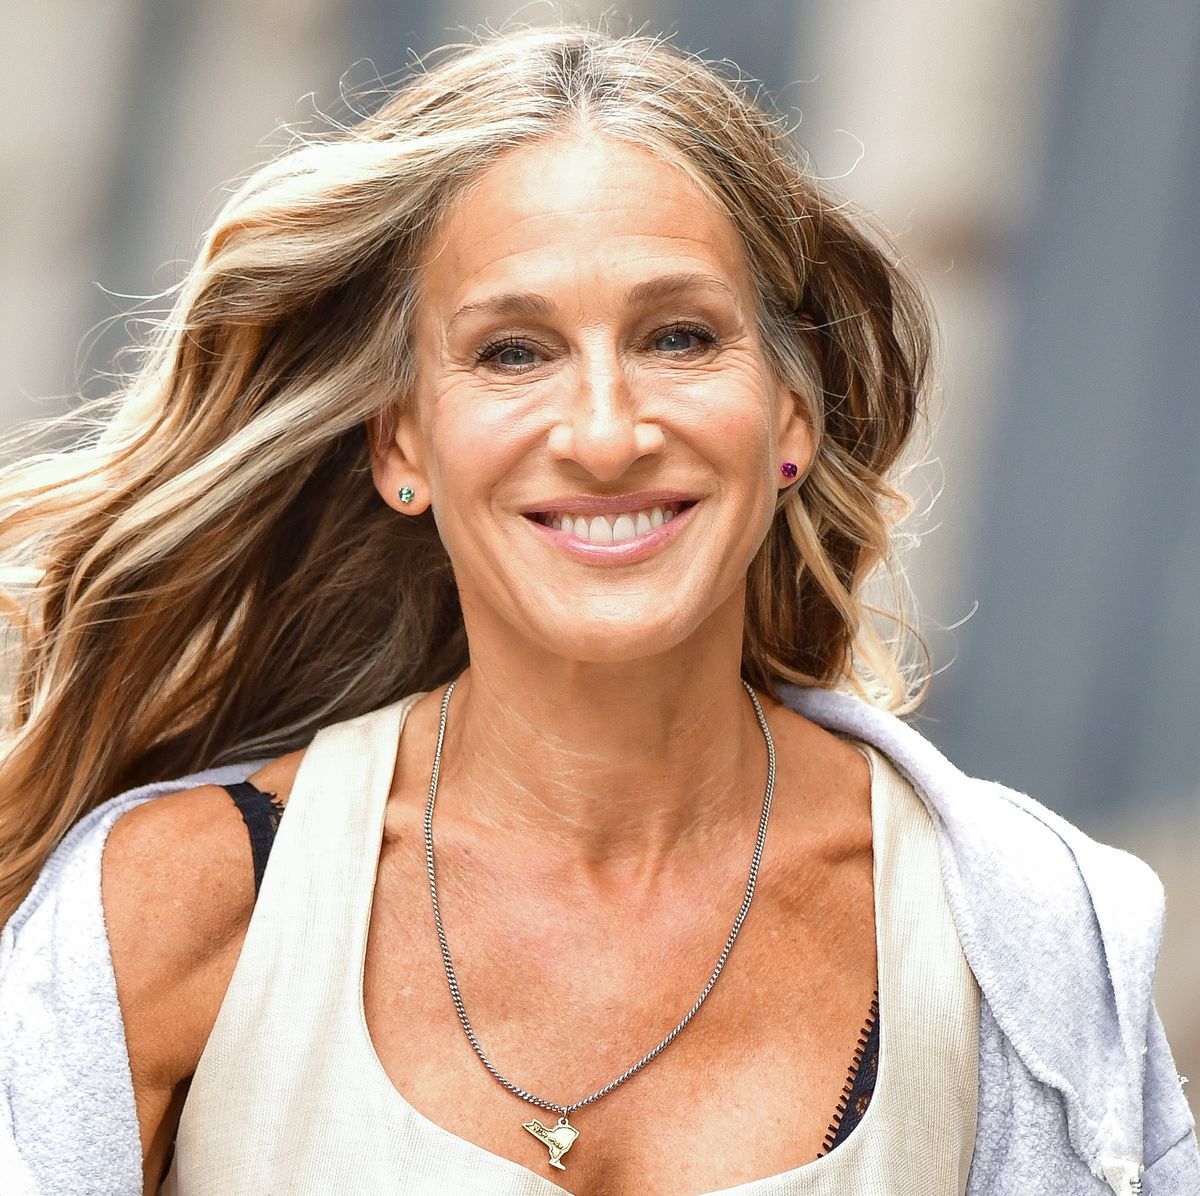 Sarah Jessica Parker's facelift speak to ageing and misogyny